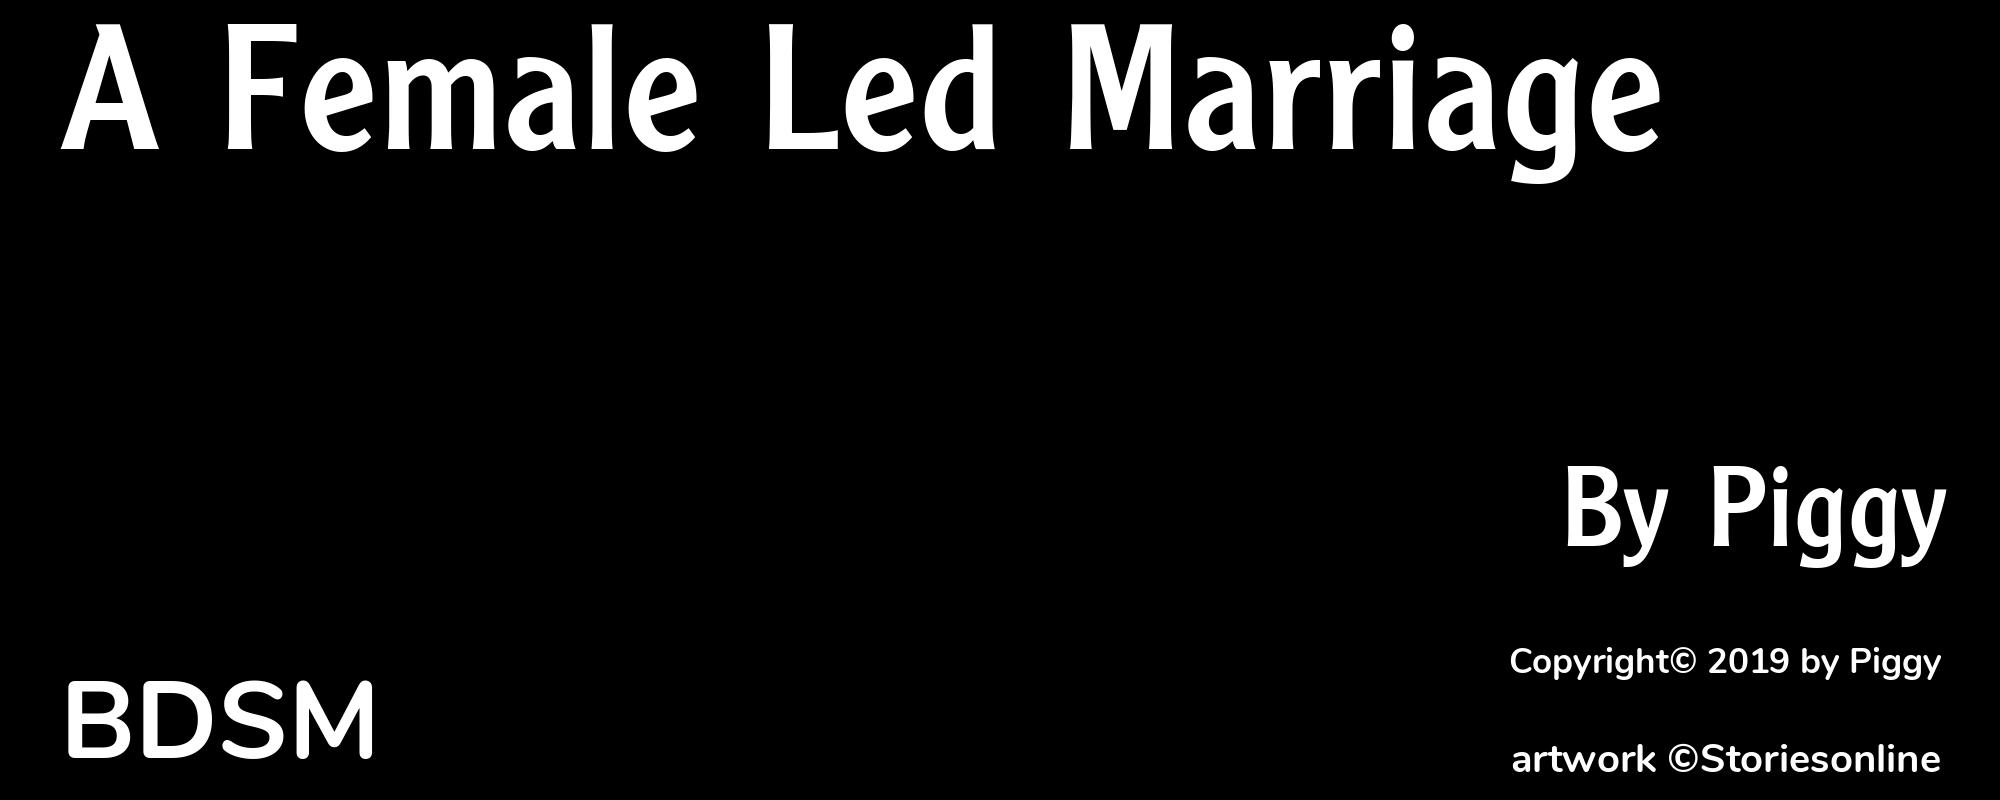 A Female Led Marriage - Cover